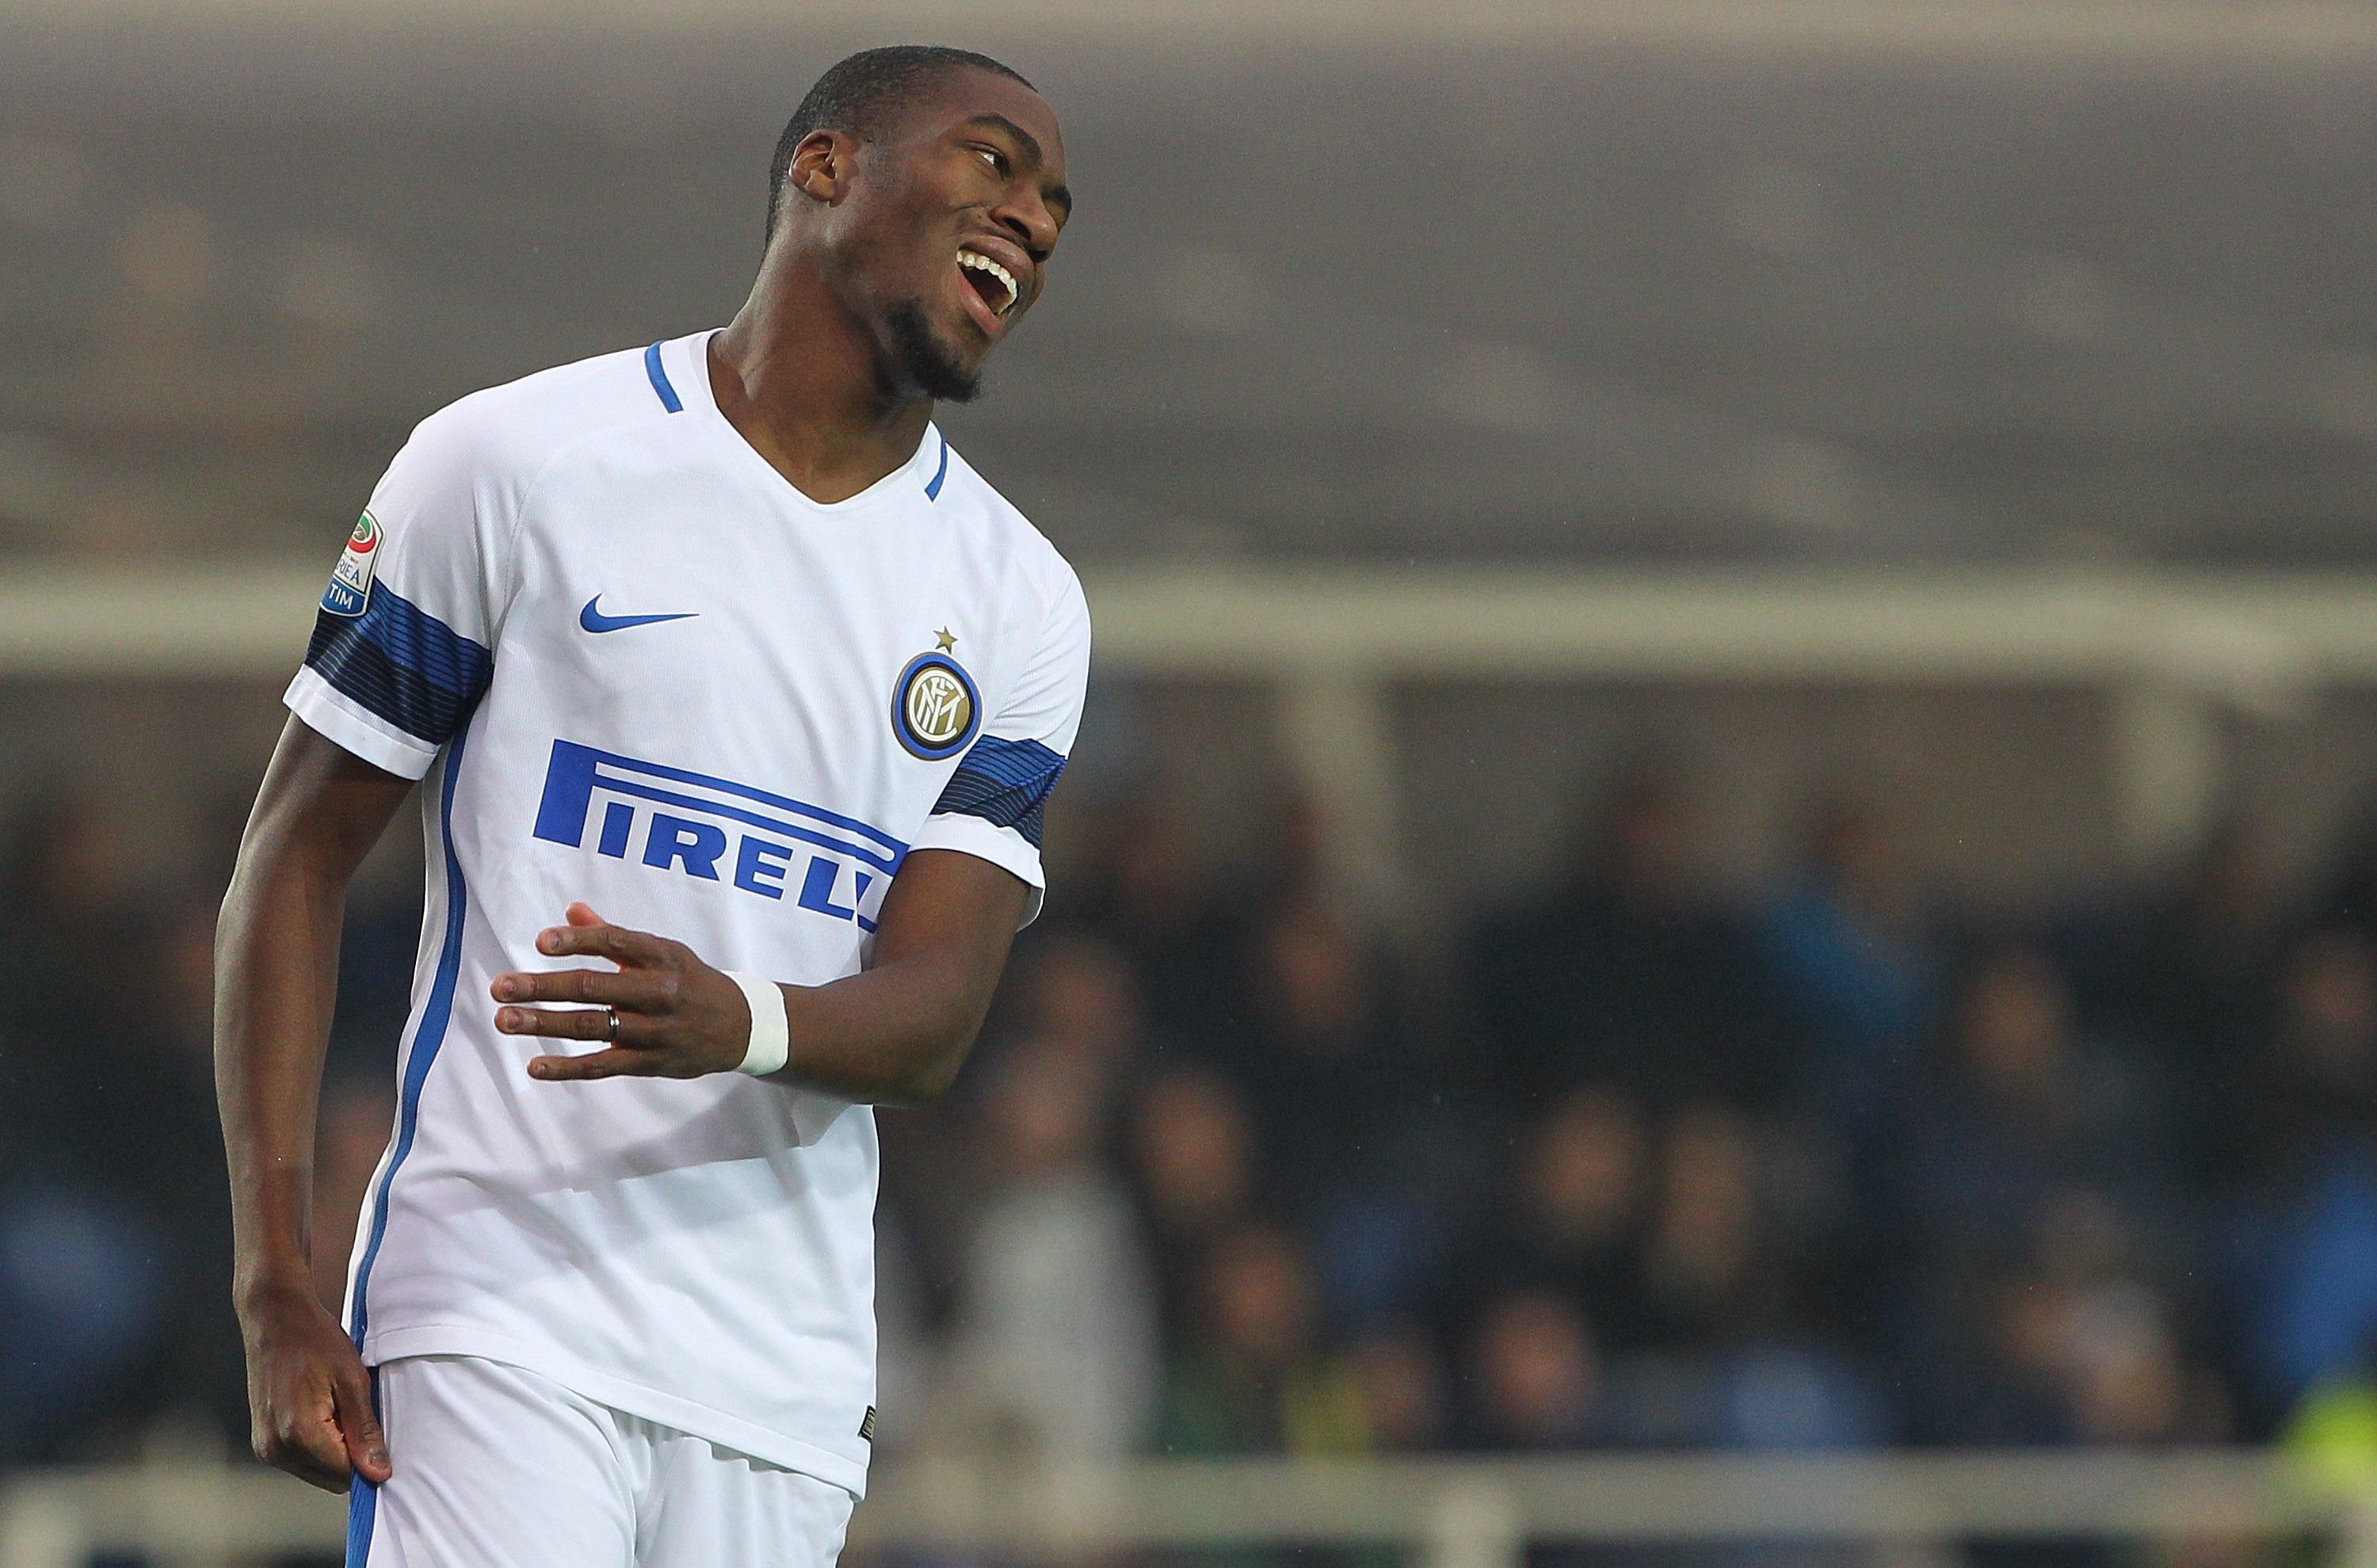 BERGAMO, ITALY - OCTOBER 23:  Geoffrey Kondogbia of FC Internazionale Milano reacts during the Serie A match between Atalanta BC and FC Internazionale at Stadio Atleti Azzurri d'Italia on October 23, 2016 in Bergamo, Italy.  (Photo by Marco Luzzani/Getty Images)